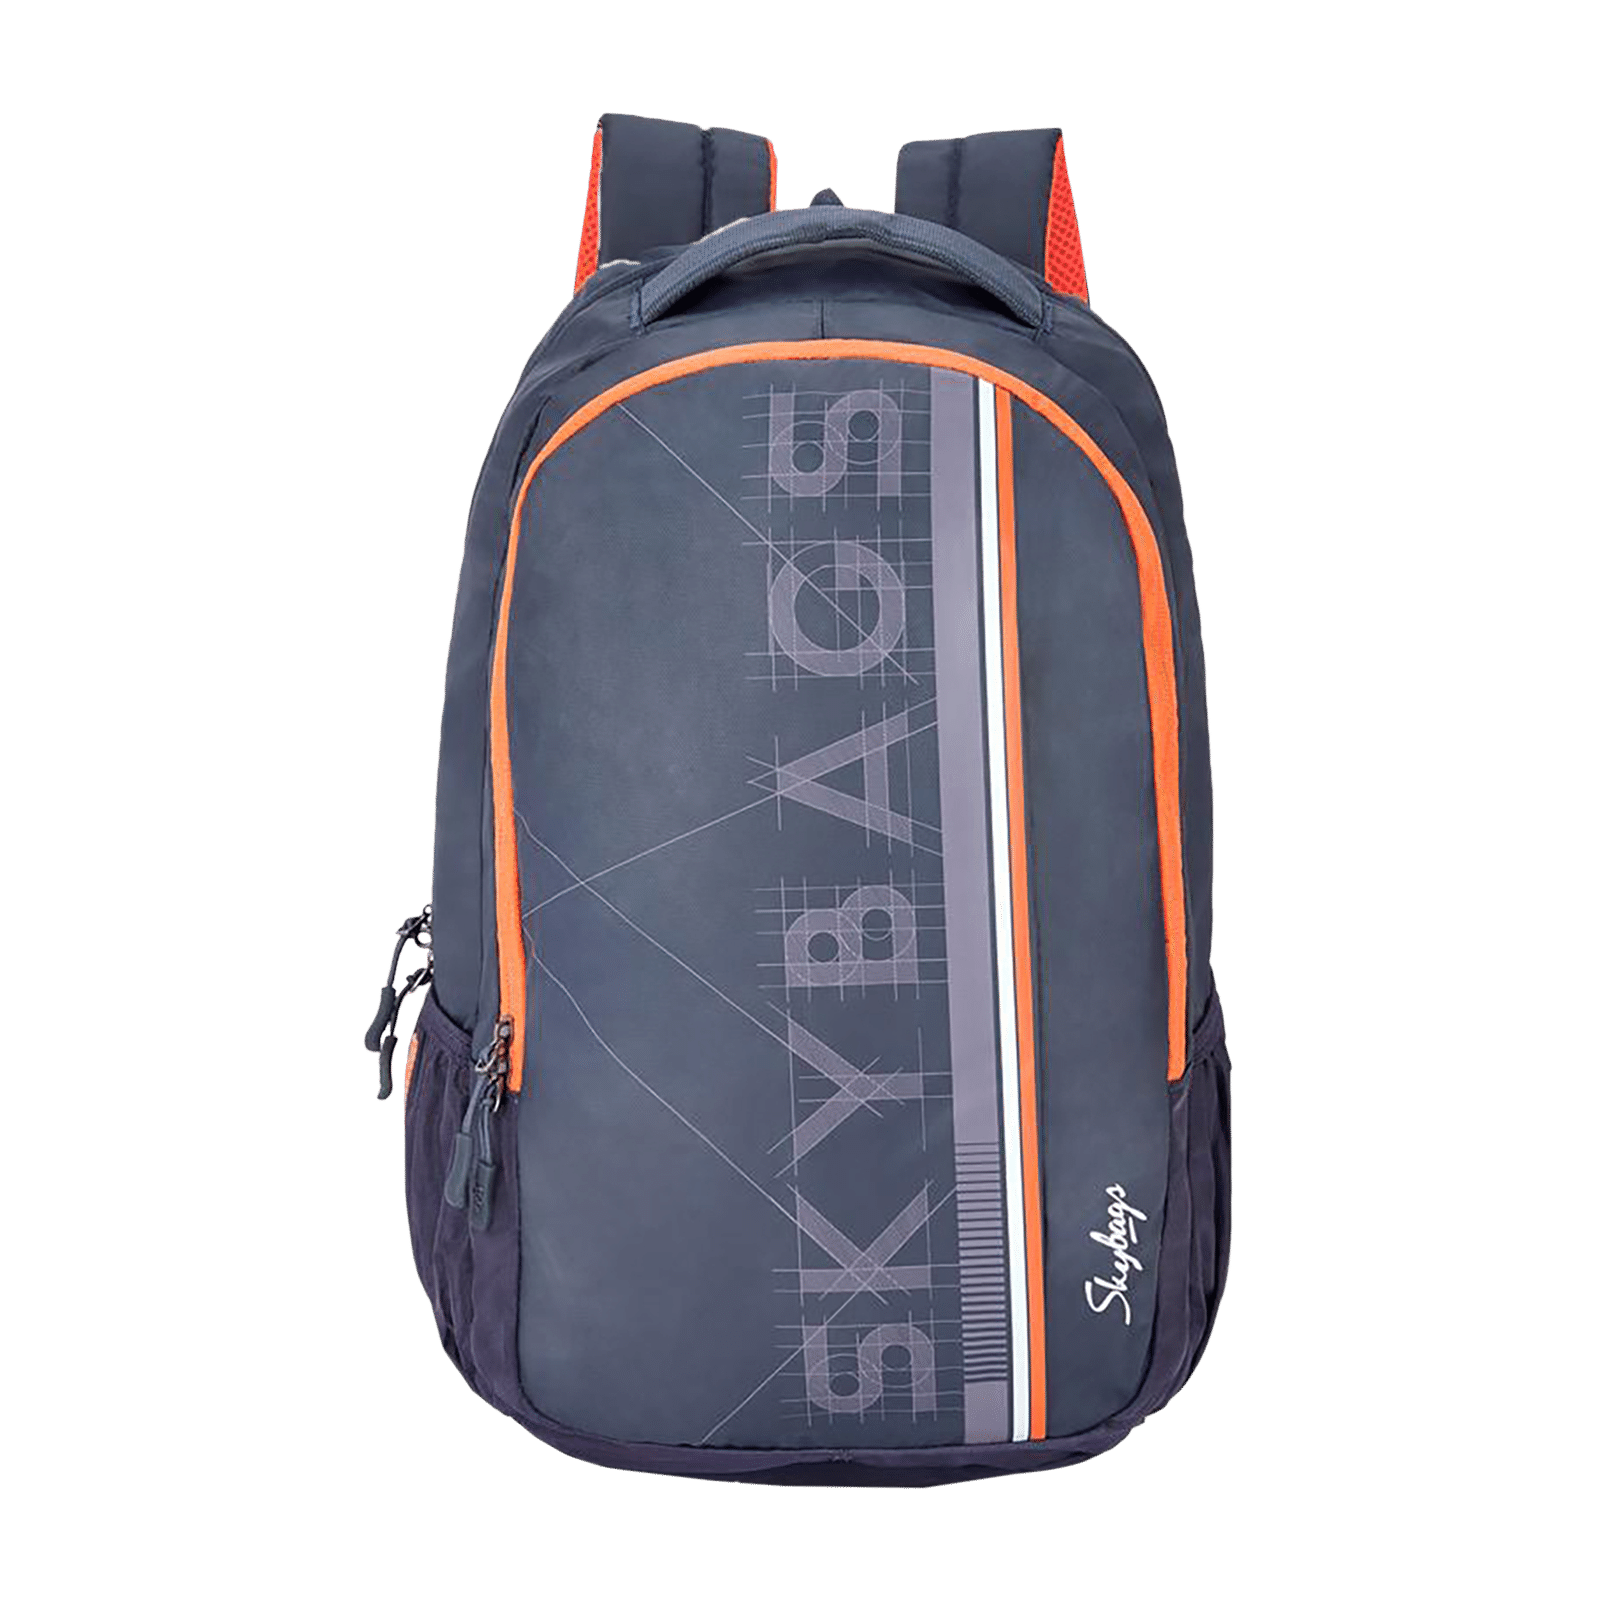 Stylish Skybags Messenger Bags